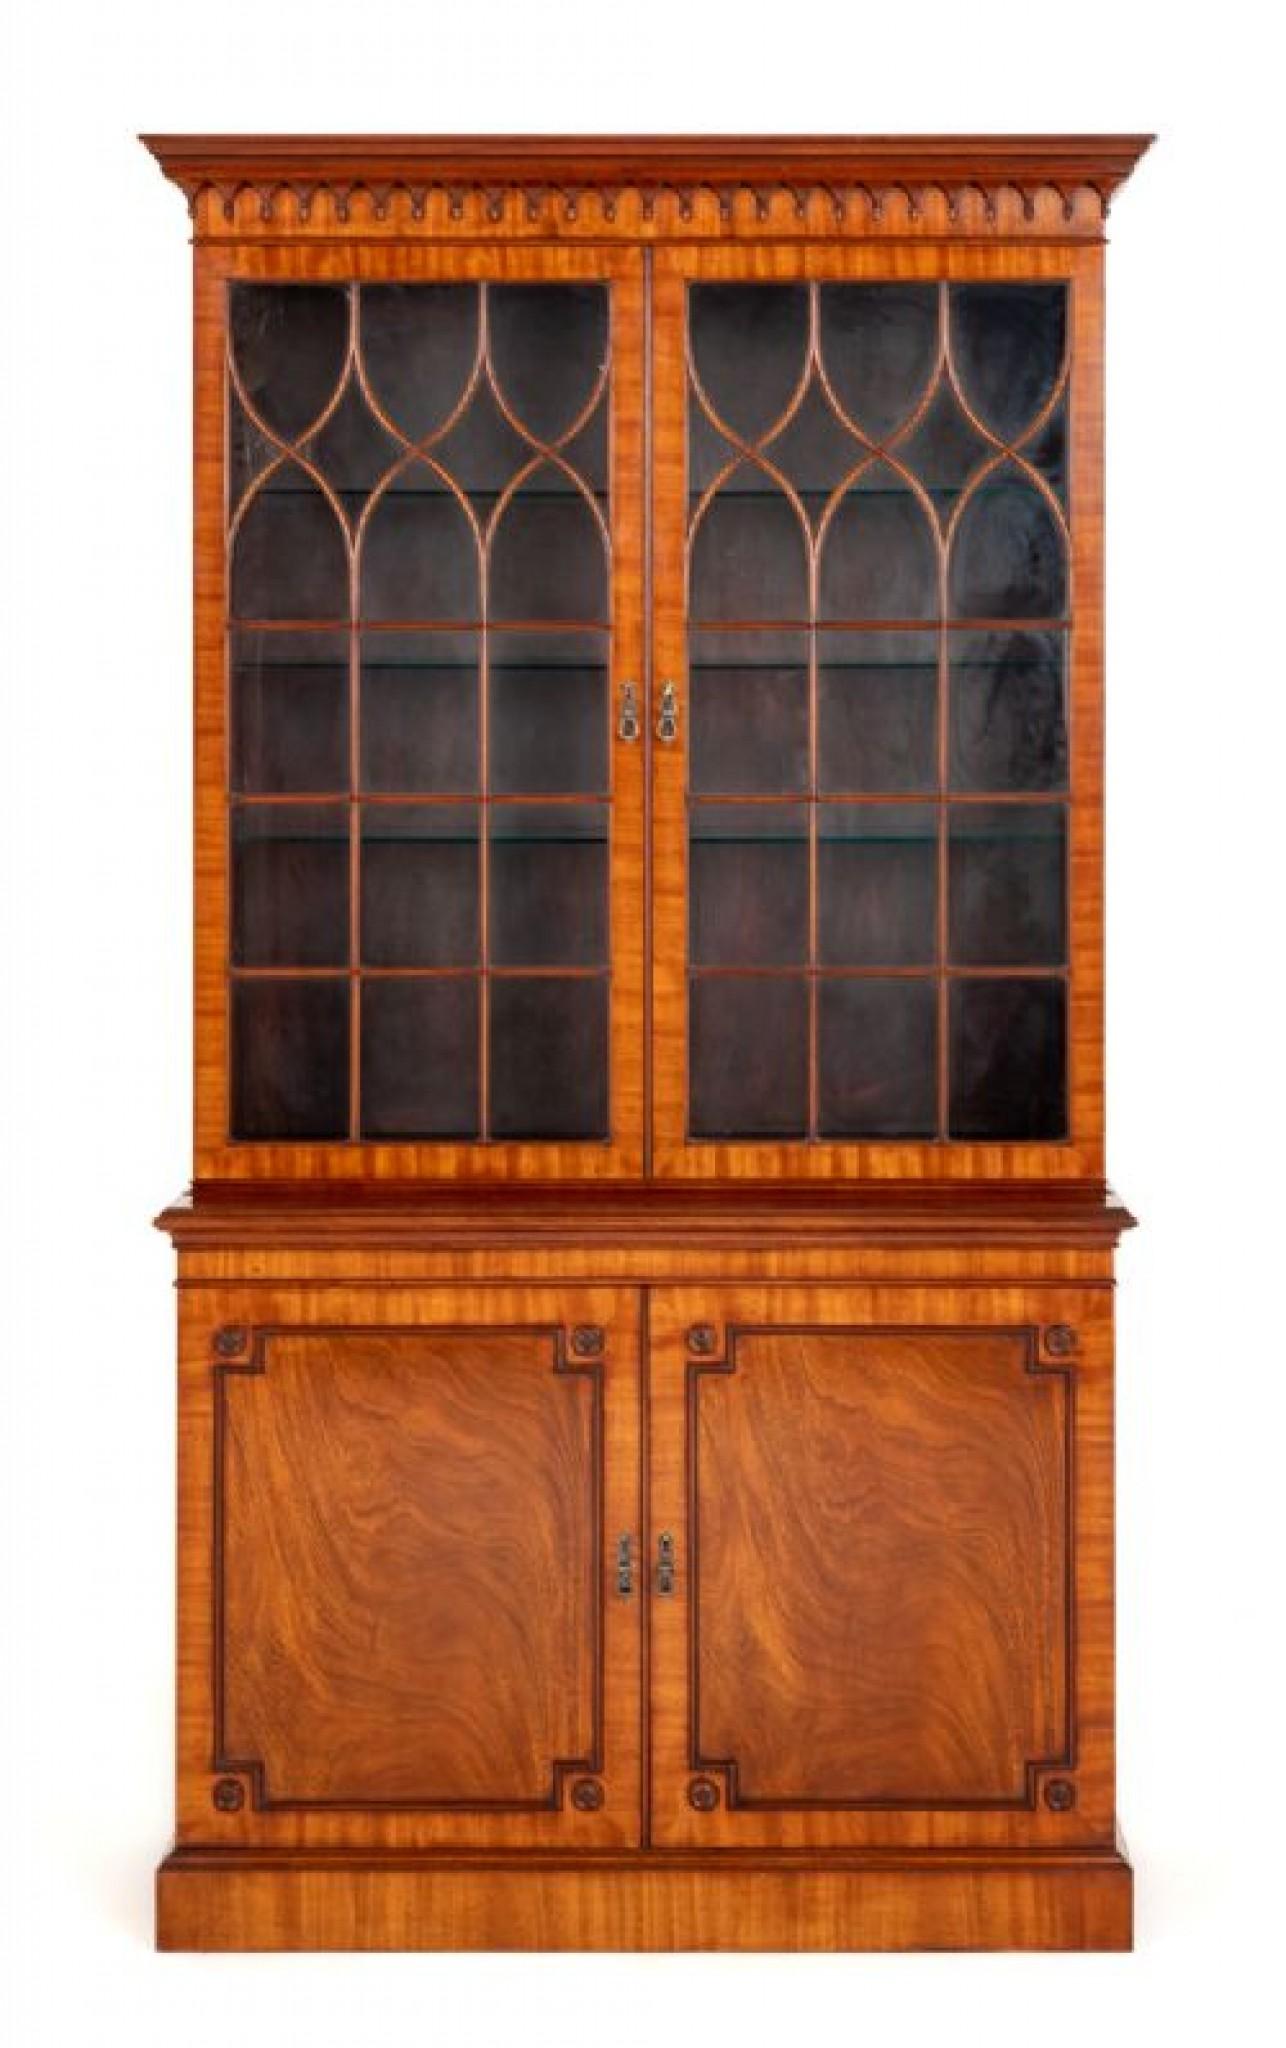 Regency Revival mahogany glazed library bookcase.
This bookcase stands upon a plinth base.
The 2 lower doors being of a panelled form with wonderful lame mahogany timbers and feature architectural moldings and turned roundels.
The up[per section